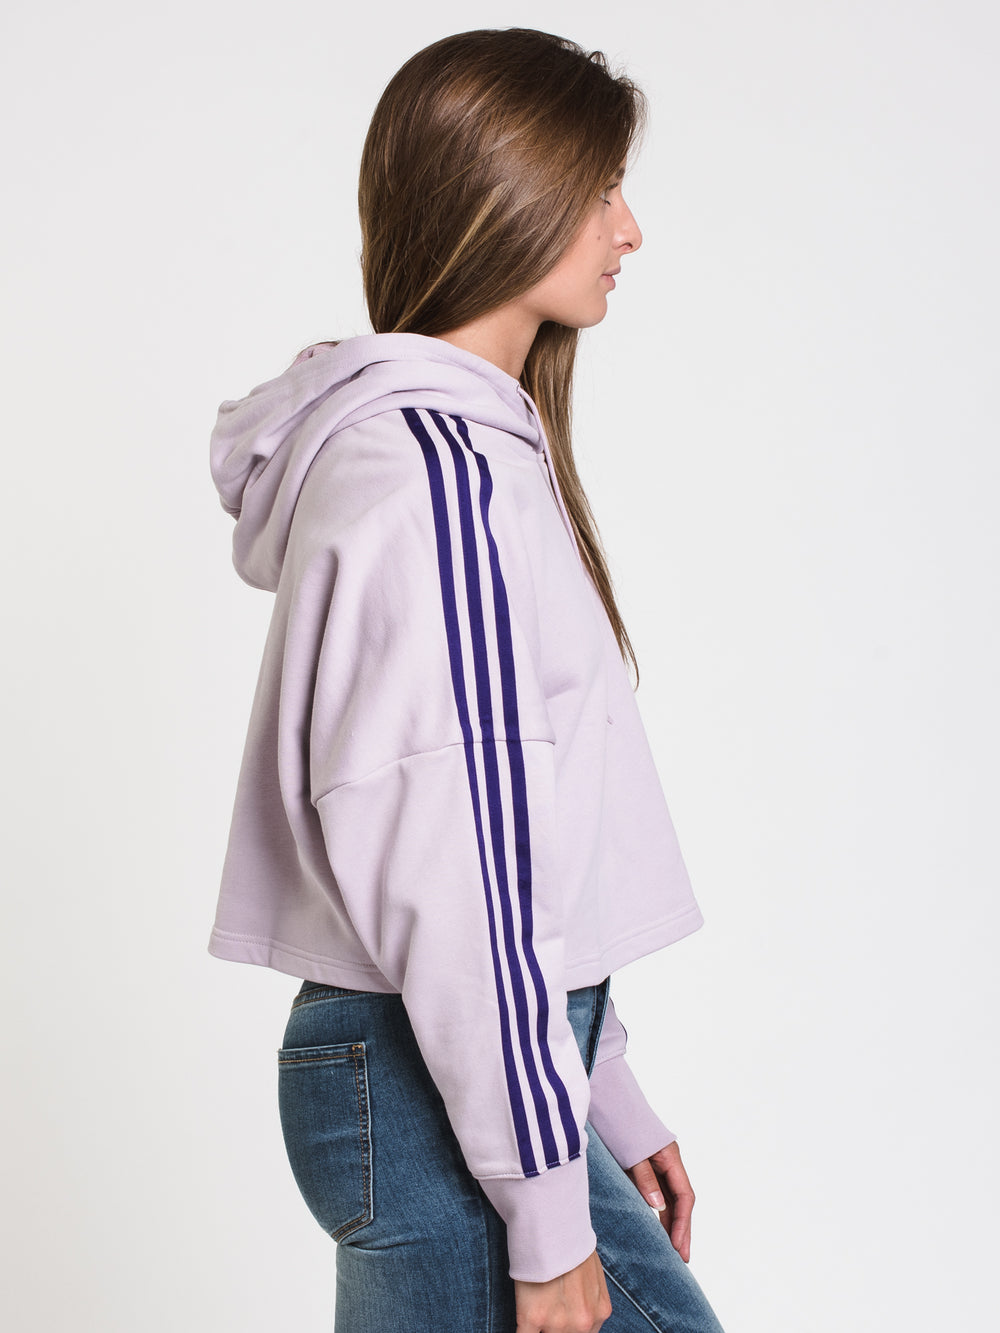 ADIDAS 3 STRIPE CUT OFF CROP PULLOVER HOODIE  - CLEARANCE